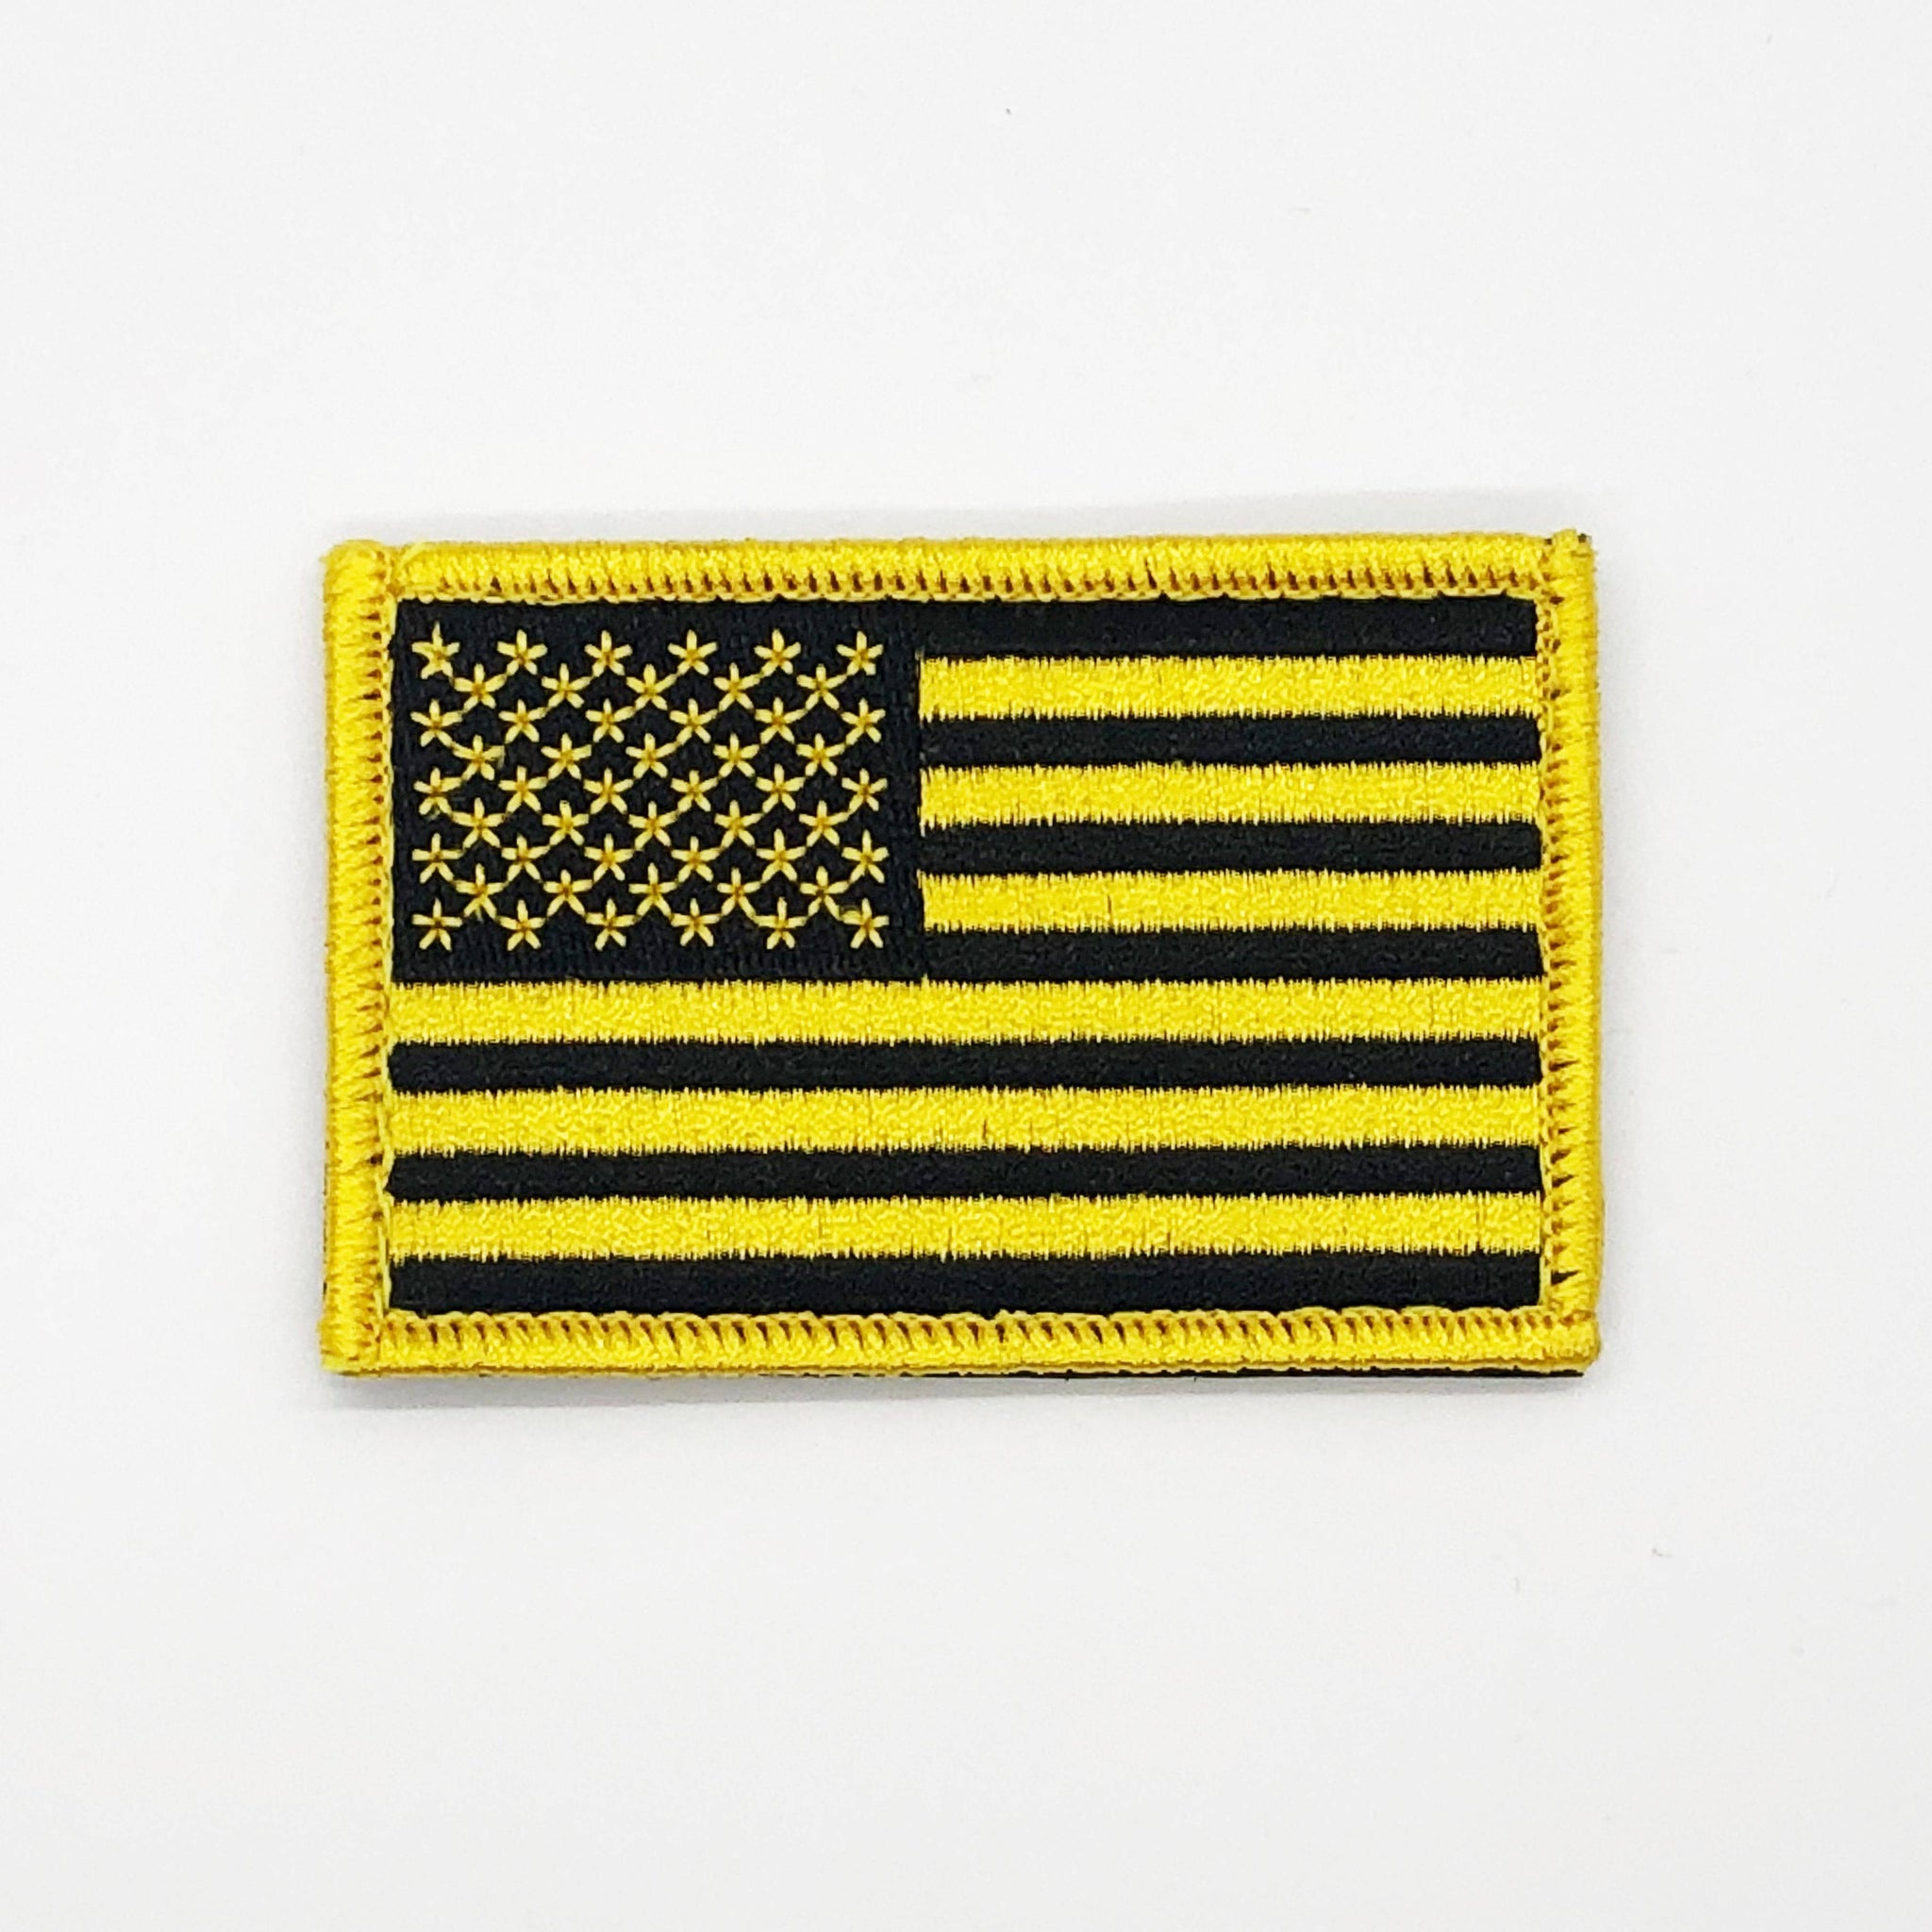 Morale Patches, Embroidered American Flag Patch - USA, Thin Blue Line, Thin Red Line 2 inch x 3 inch Patch w/ Velcro/Hook Backing, Yellow